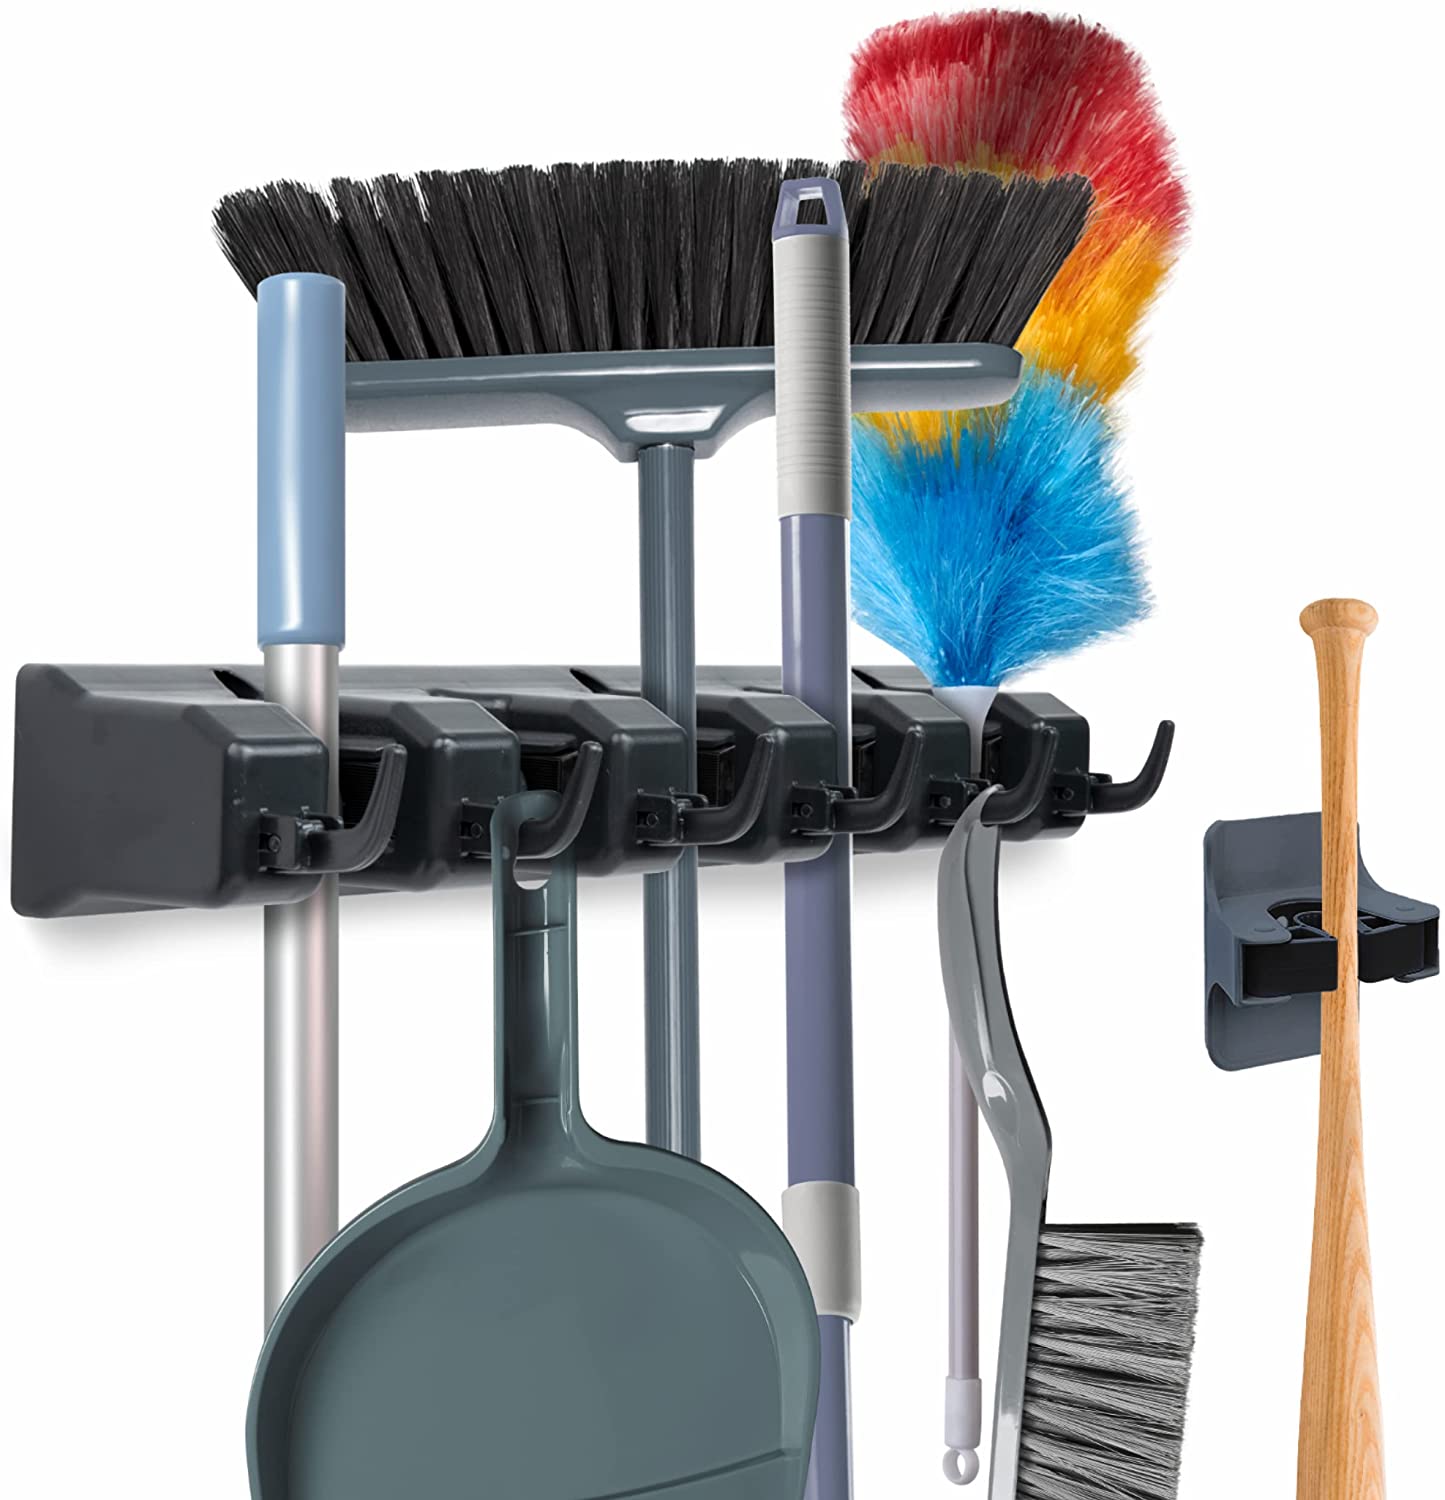 Combo 5 Slot Broom Holder w/ 1 Self Adhesive Mop Gripper $9.97 + FS with Prime